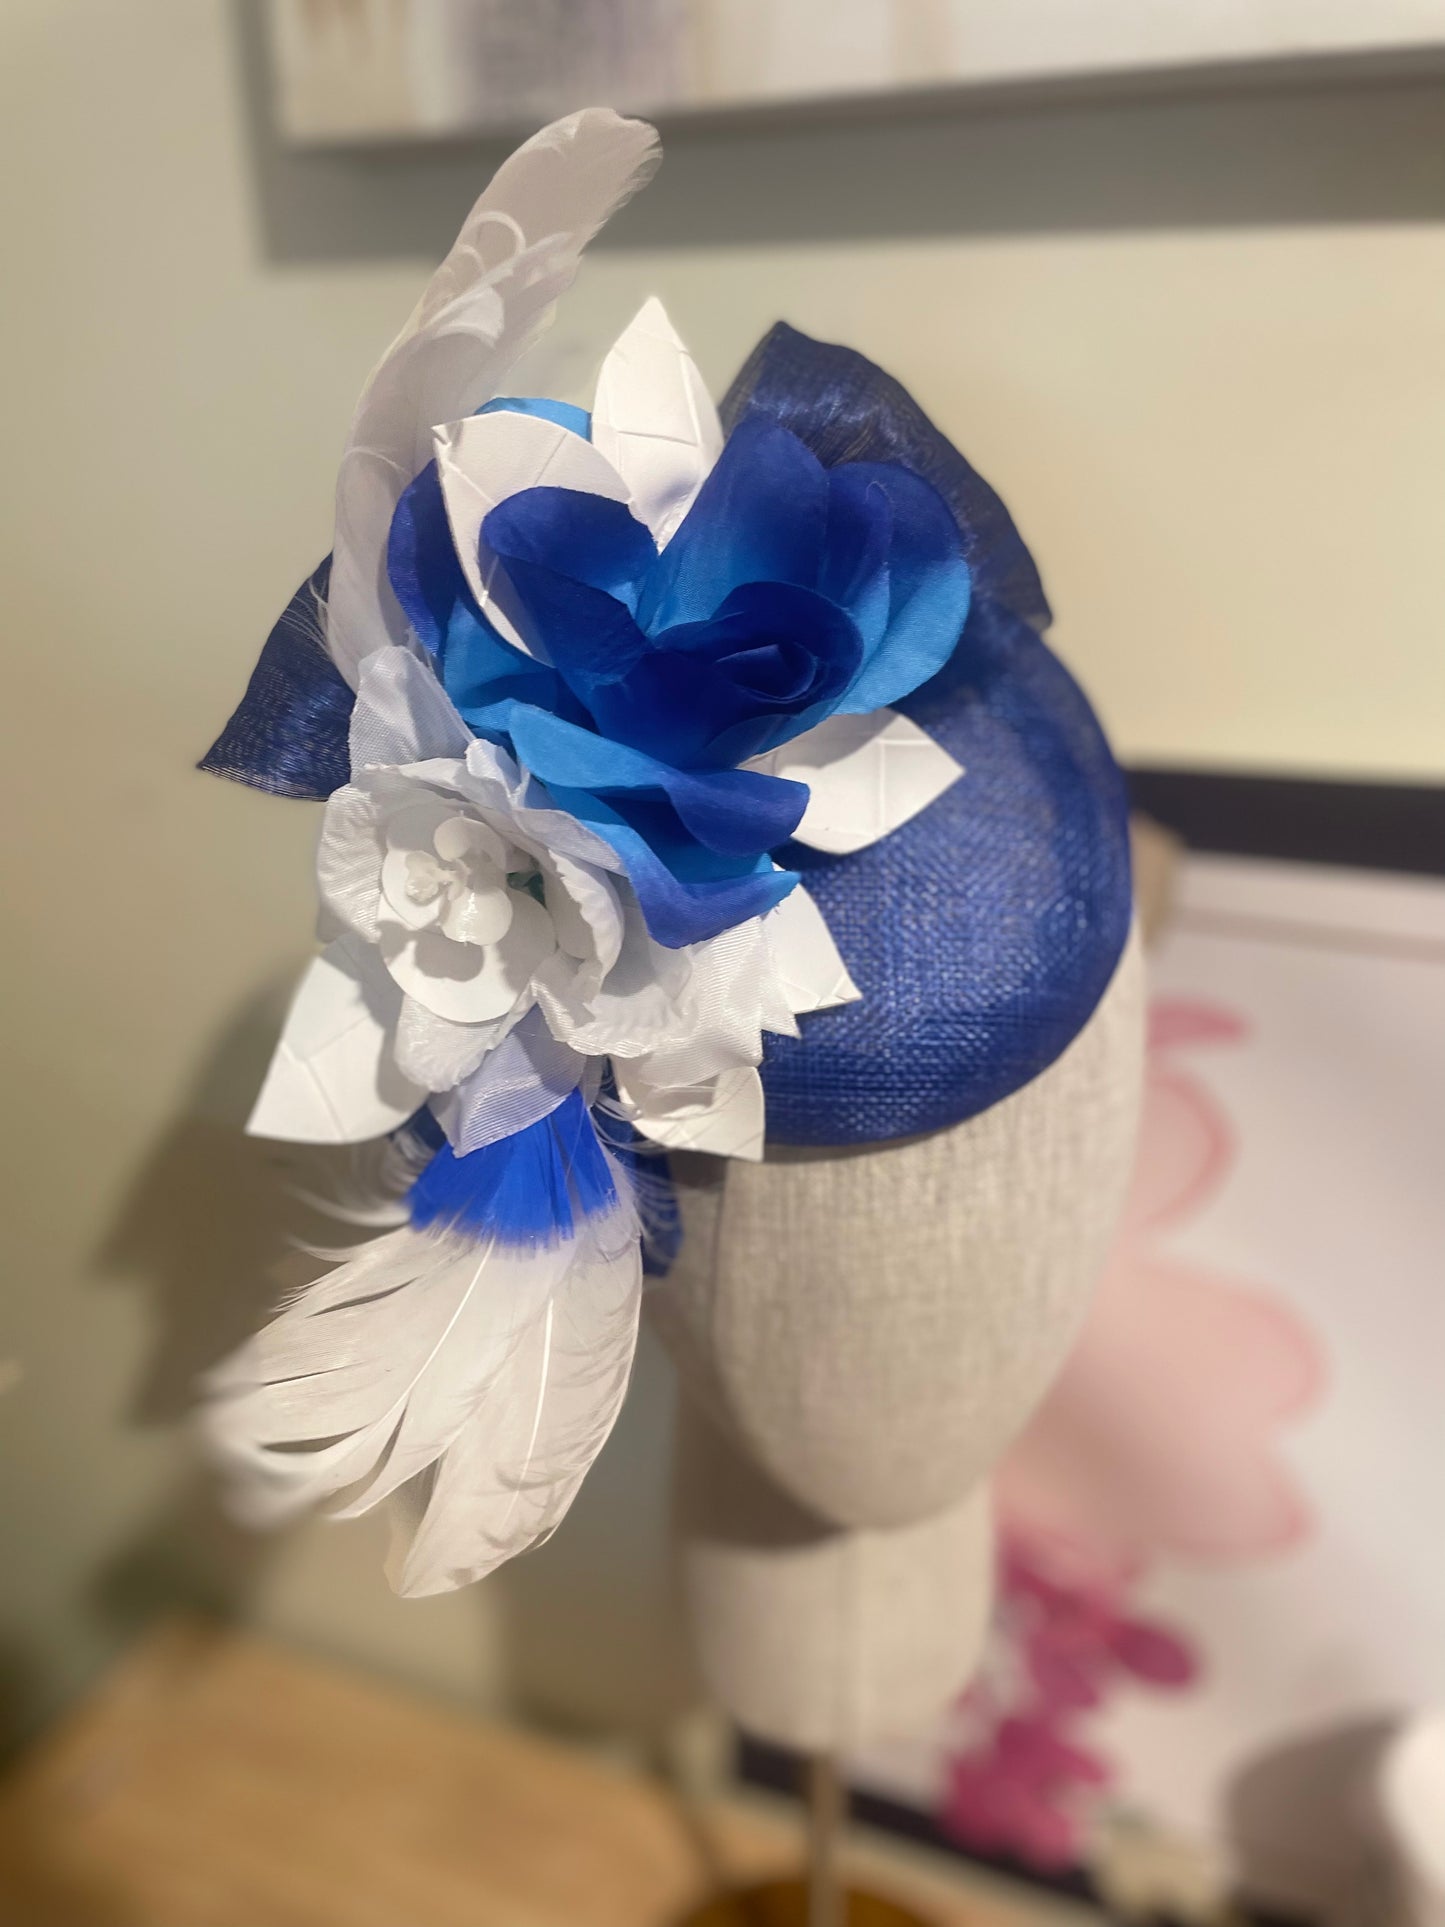 Blue and white floral